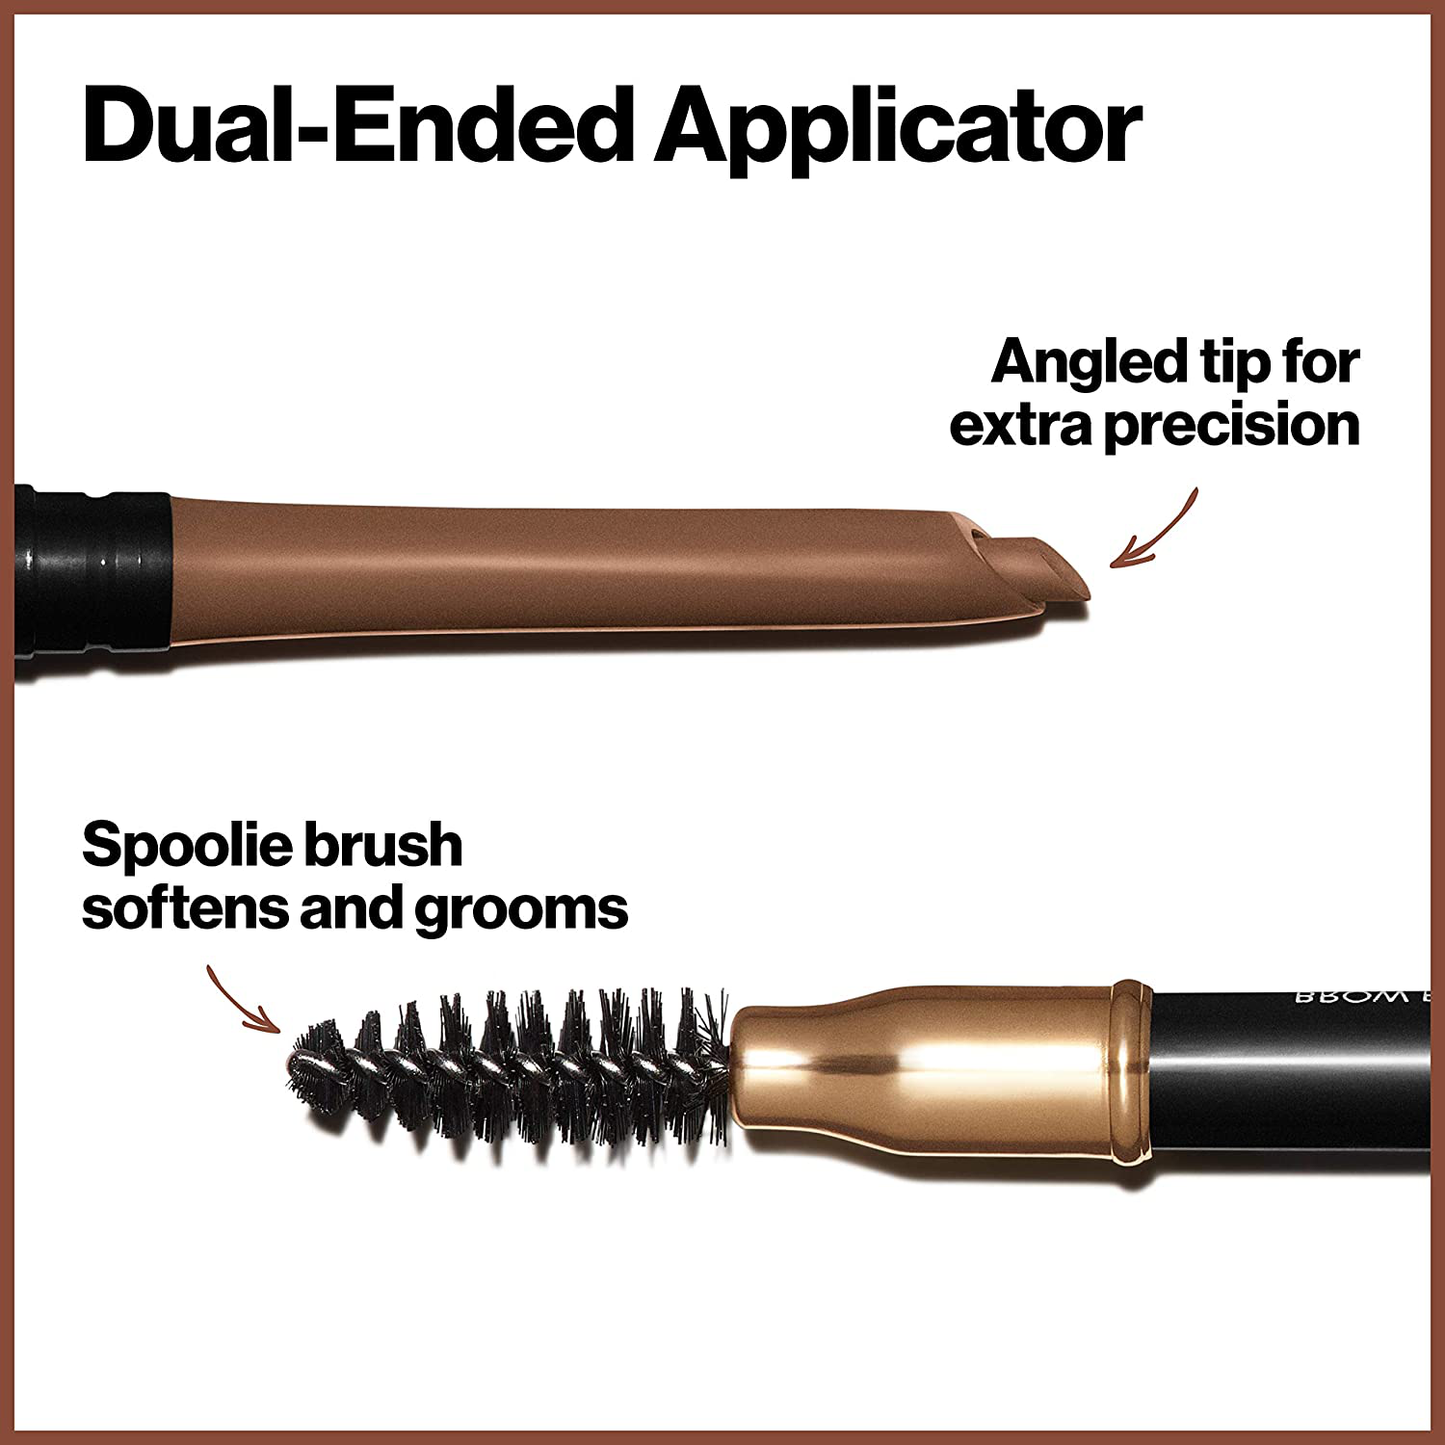 Revlon ColorStay Eyebrow Pencil with Spoolie Brush, Waterproof, Longwearing, Angled Tip Applicator for Perfect Brows